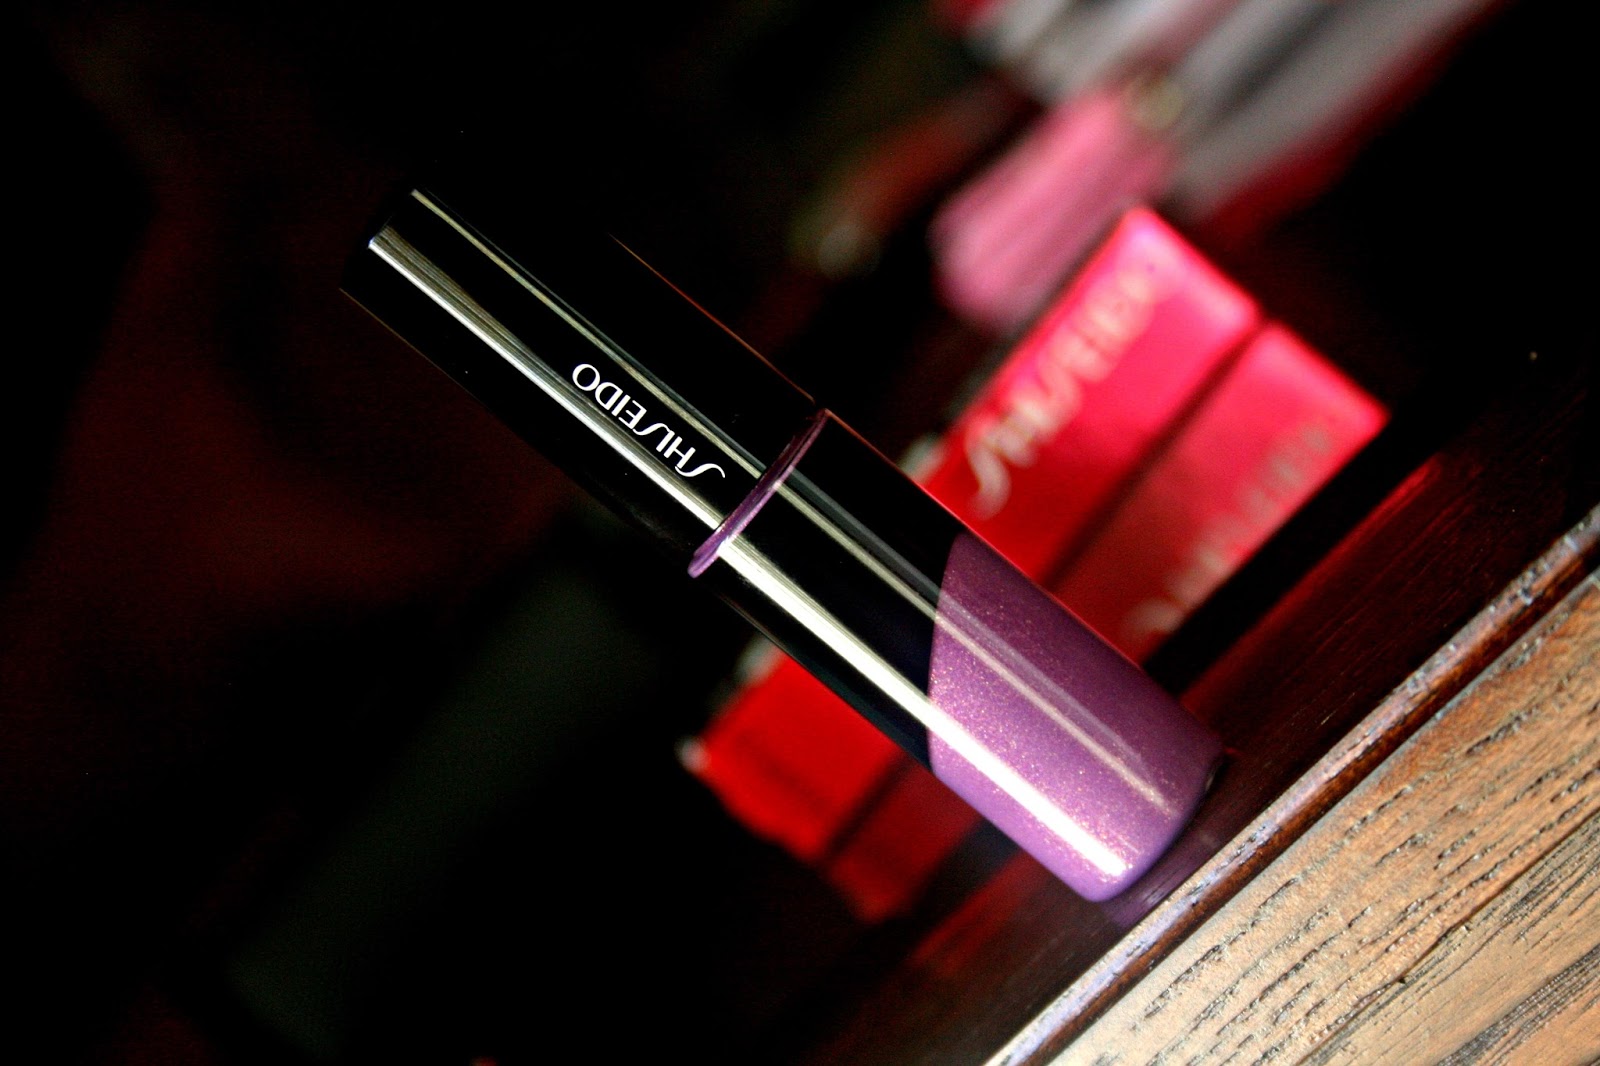 Shiseido Lacquer Gloss in VI207 Nebula Review, Photos & Swatches